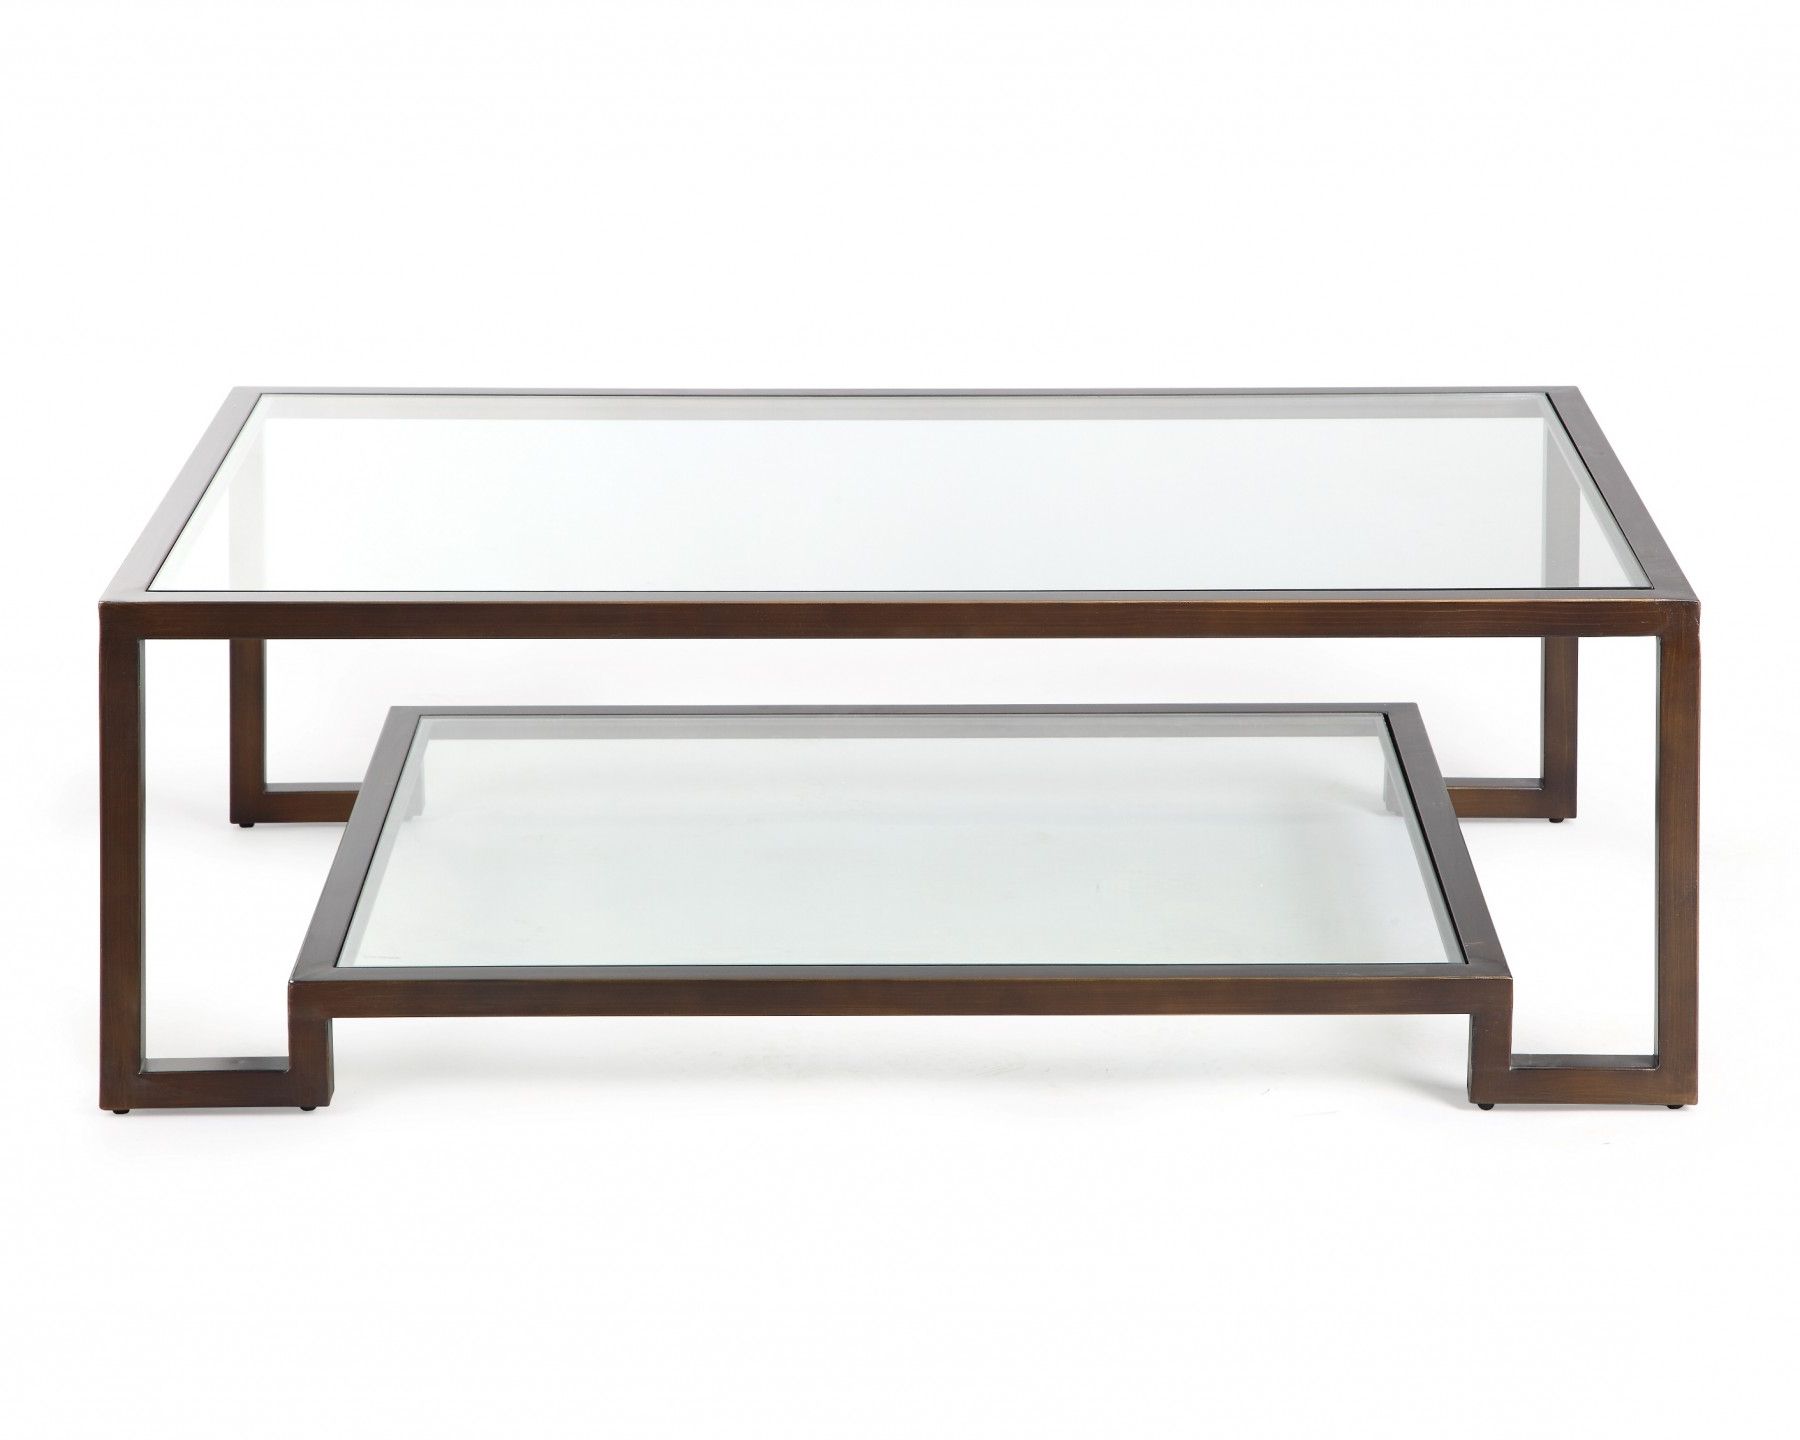 Shop Now Regarding Trendy Antiqued Gold Rectangular Coffee Tables (View 14 of 20)